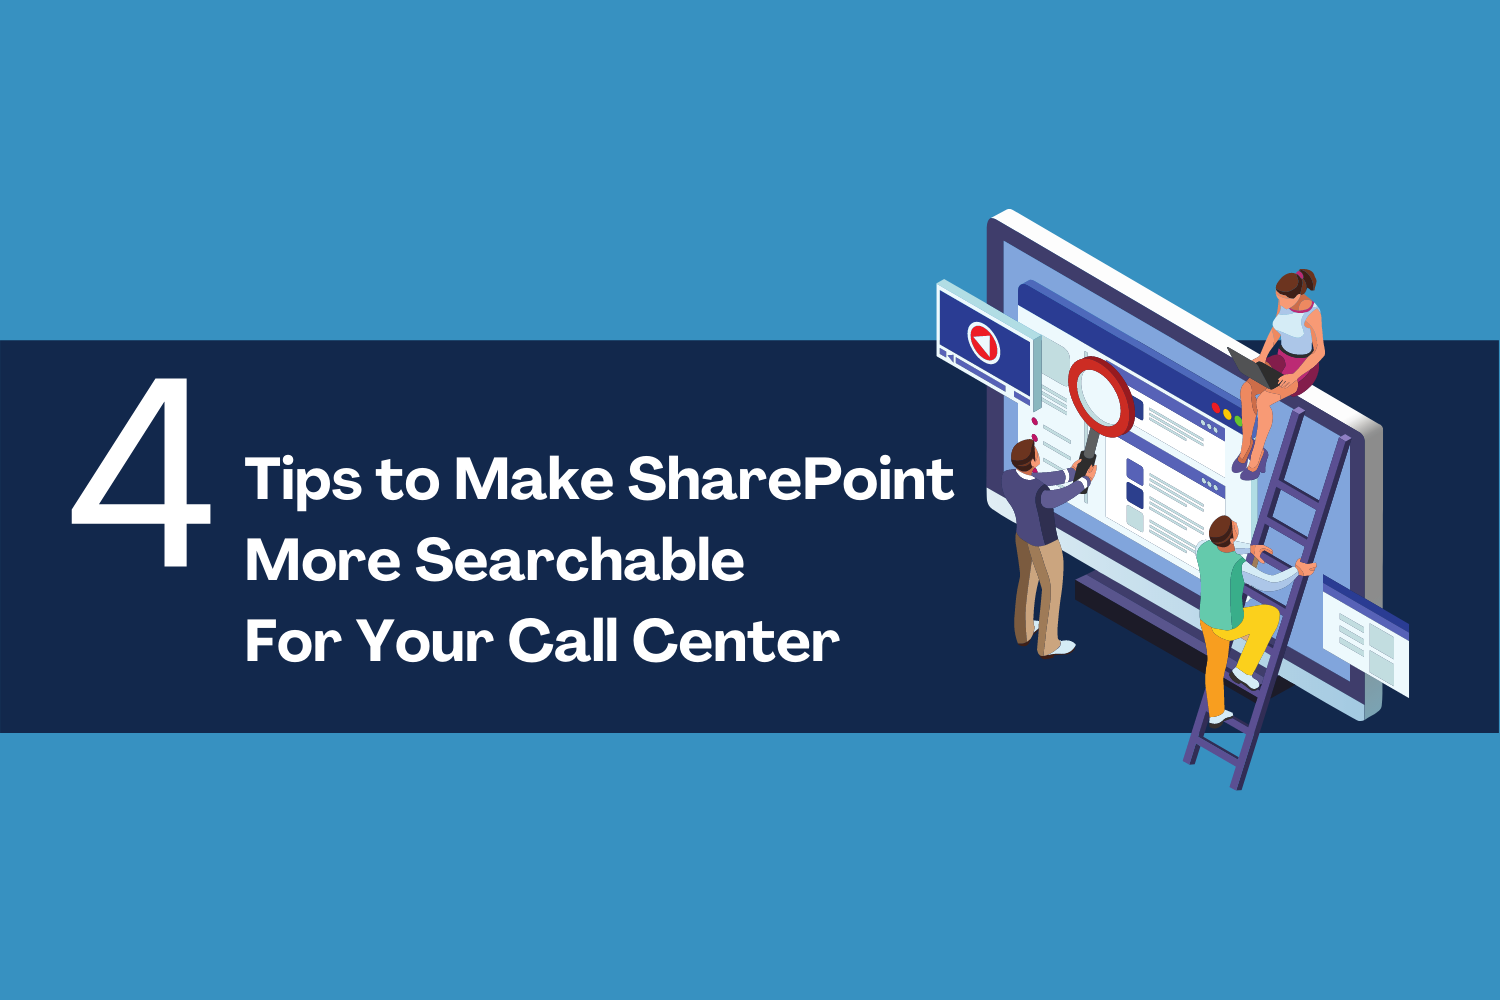 4 Tips to Make SharePoint More Searchable For Your Call Center